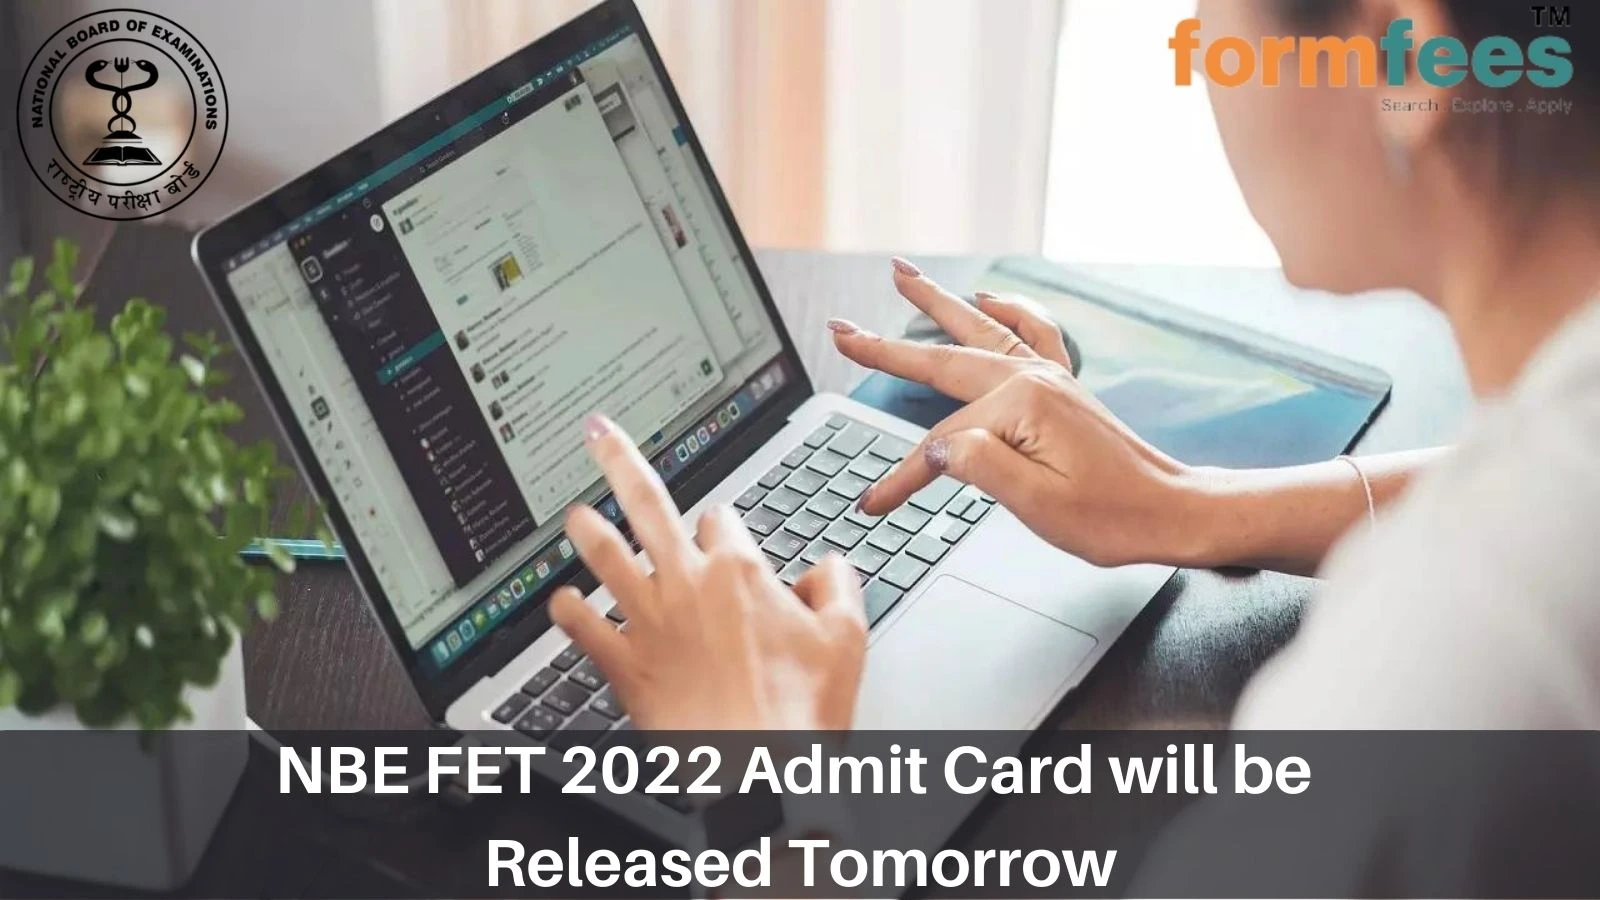 NBE FET 2022 Admit Card will be Released Tomorrow